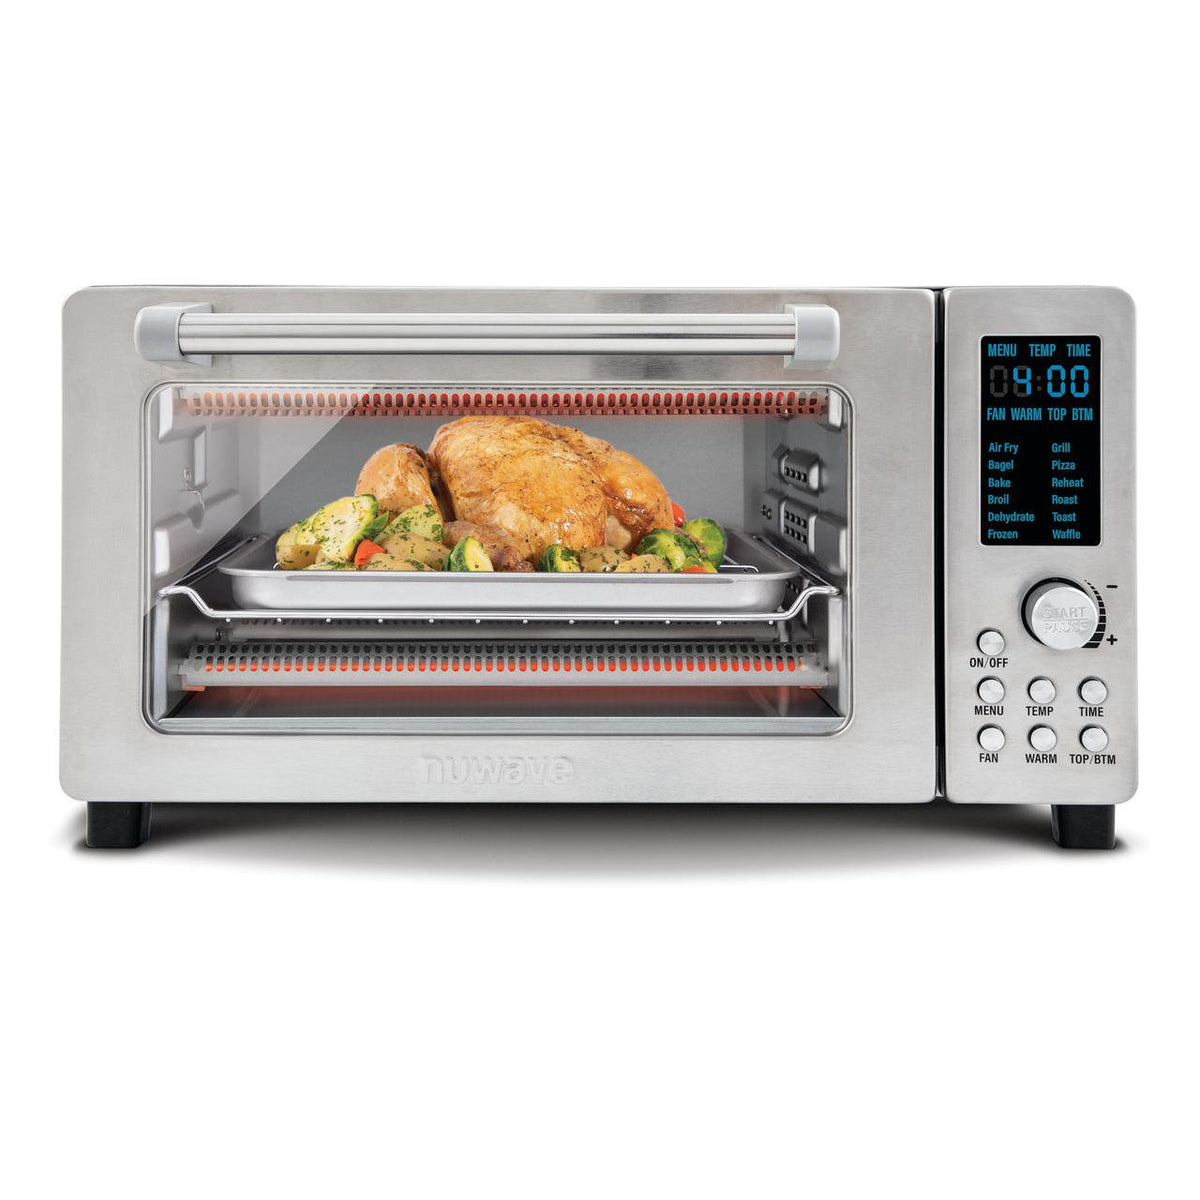 NuWave 20831 Bravo 0.7 cubic foot Air Fryer Toaster Oven